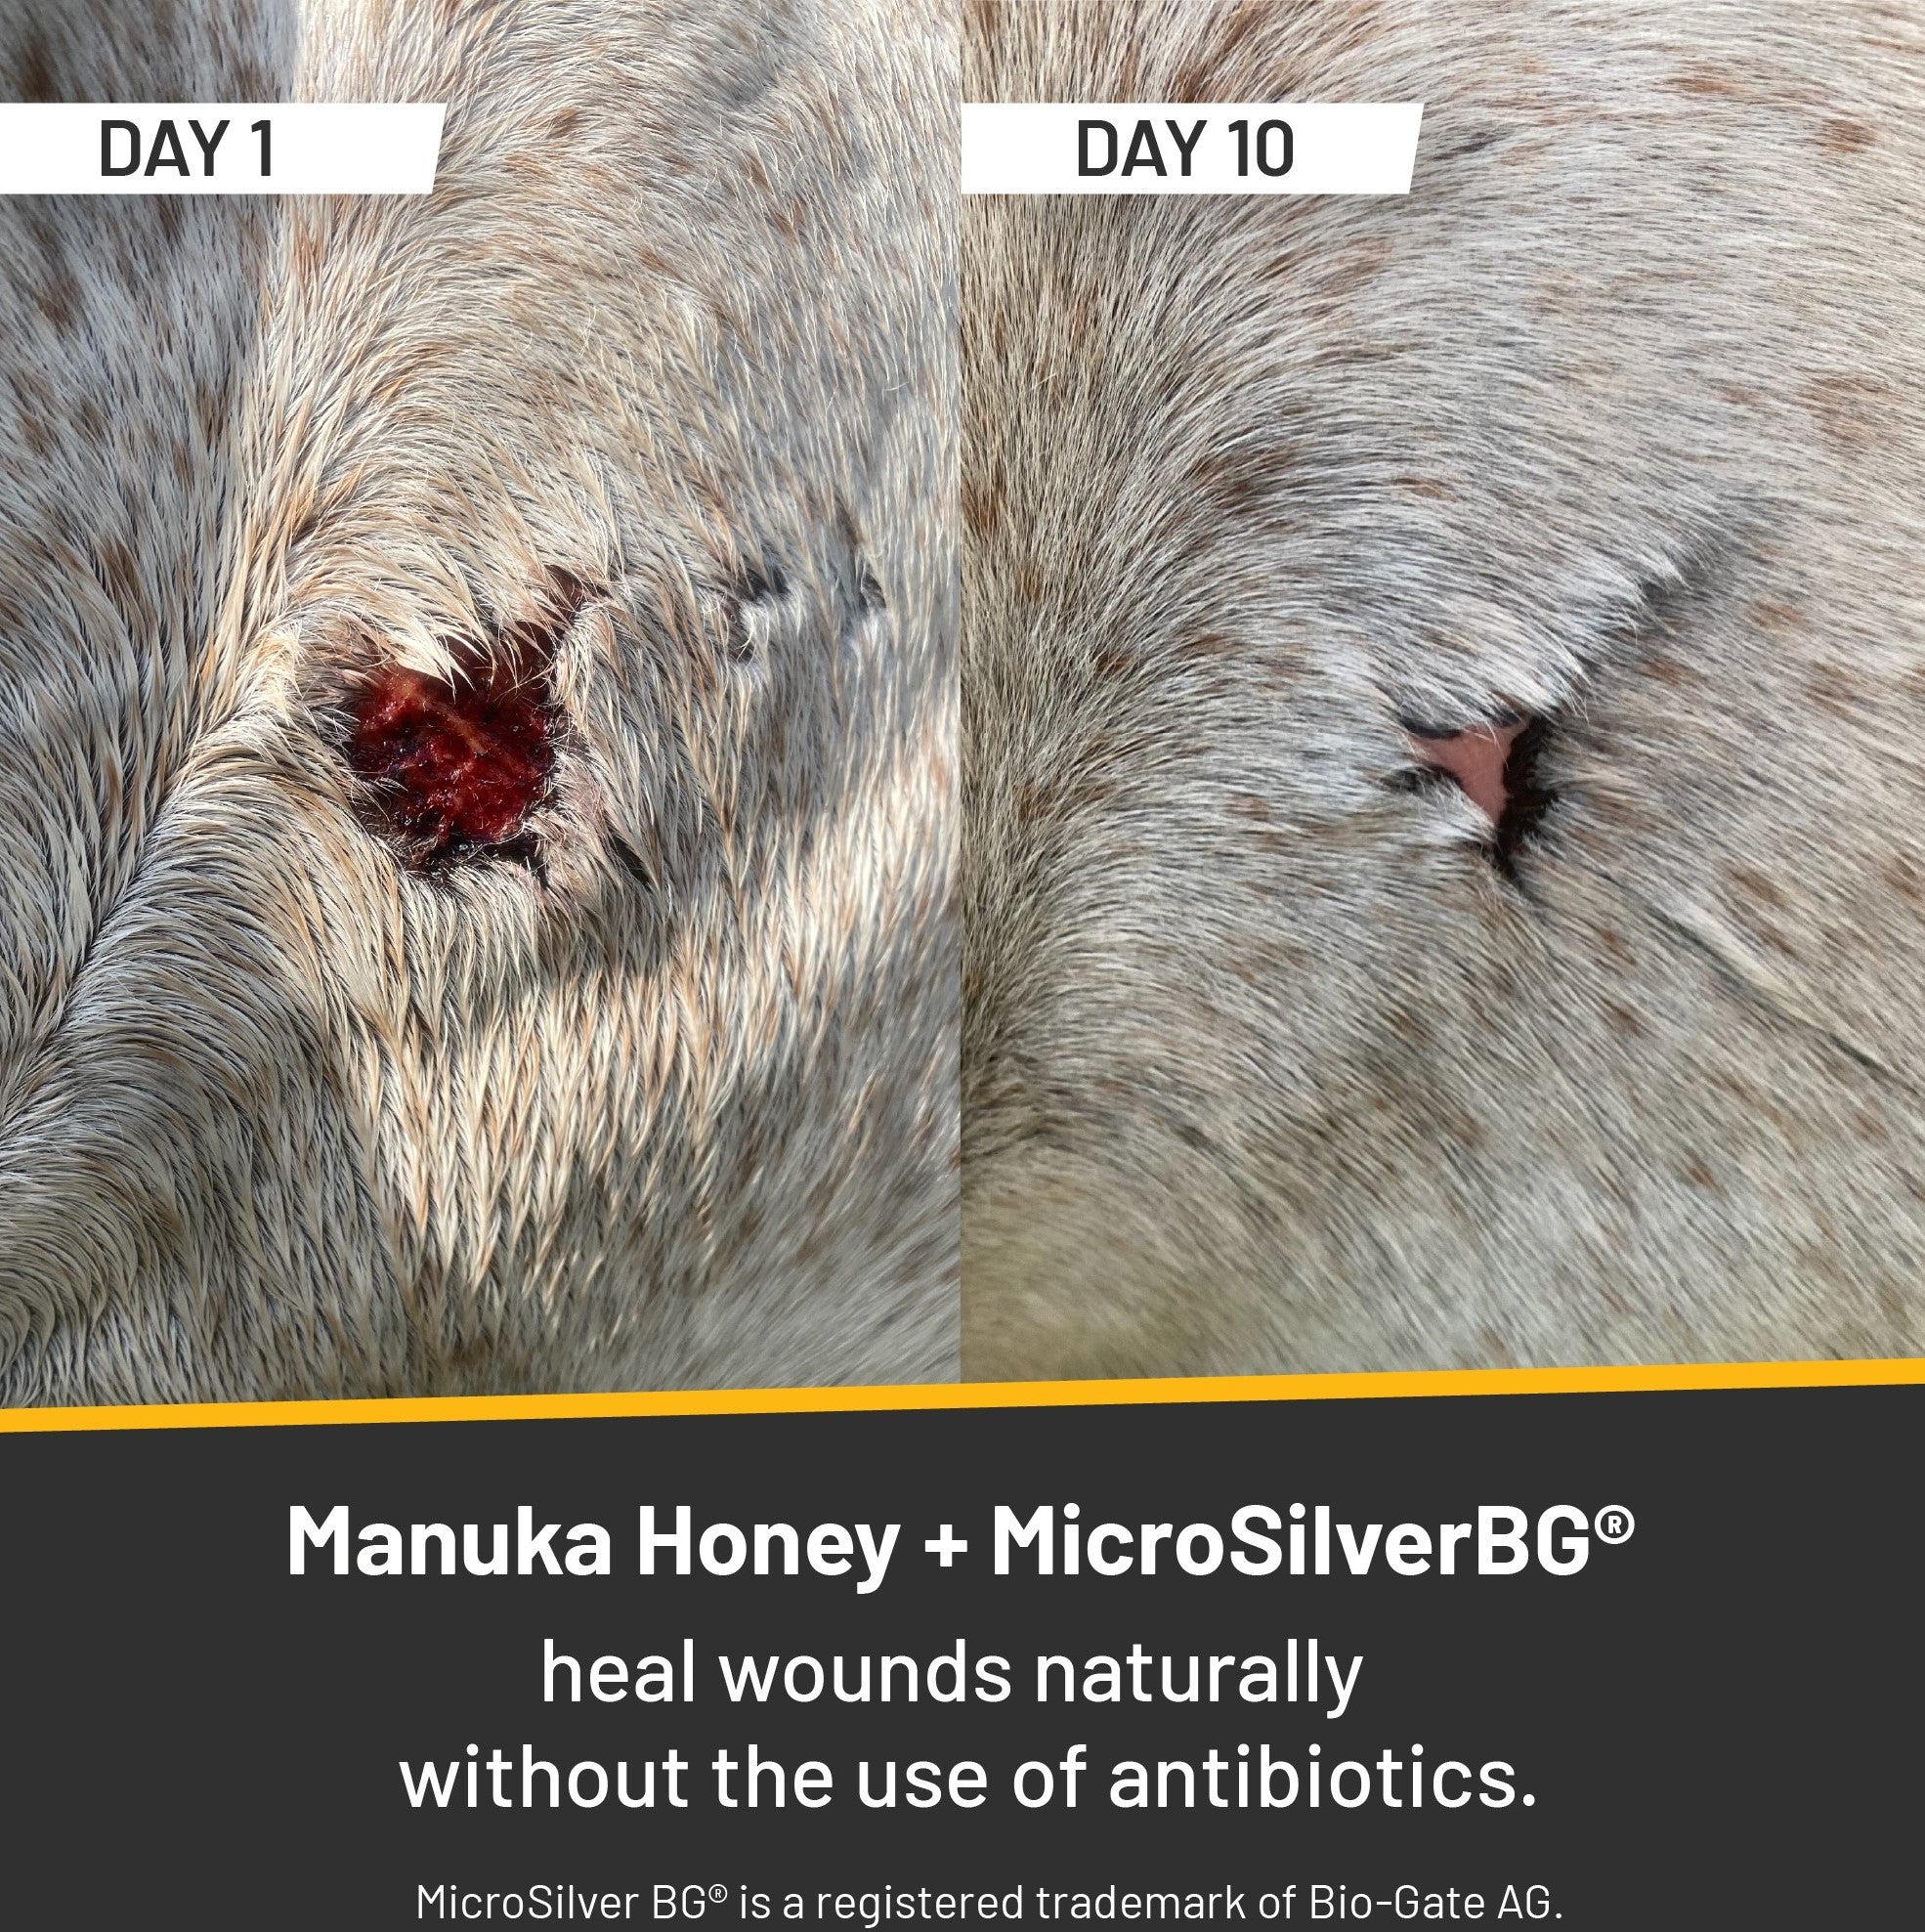 Split image of a tan colored horse with a half dollar size wound on the left side (day 1). On the right side it shows the same perspective of the horse's wound on day 10, where it has healed up, and hair is actually growing back over most of the spot.Manuka Honey and Microsilver BG heal wounds naturally without the use of antibiotics.